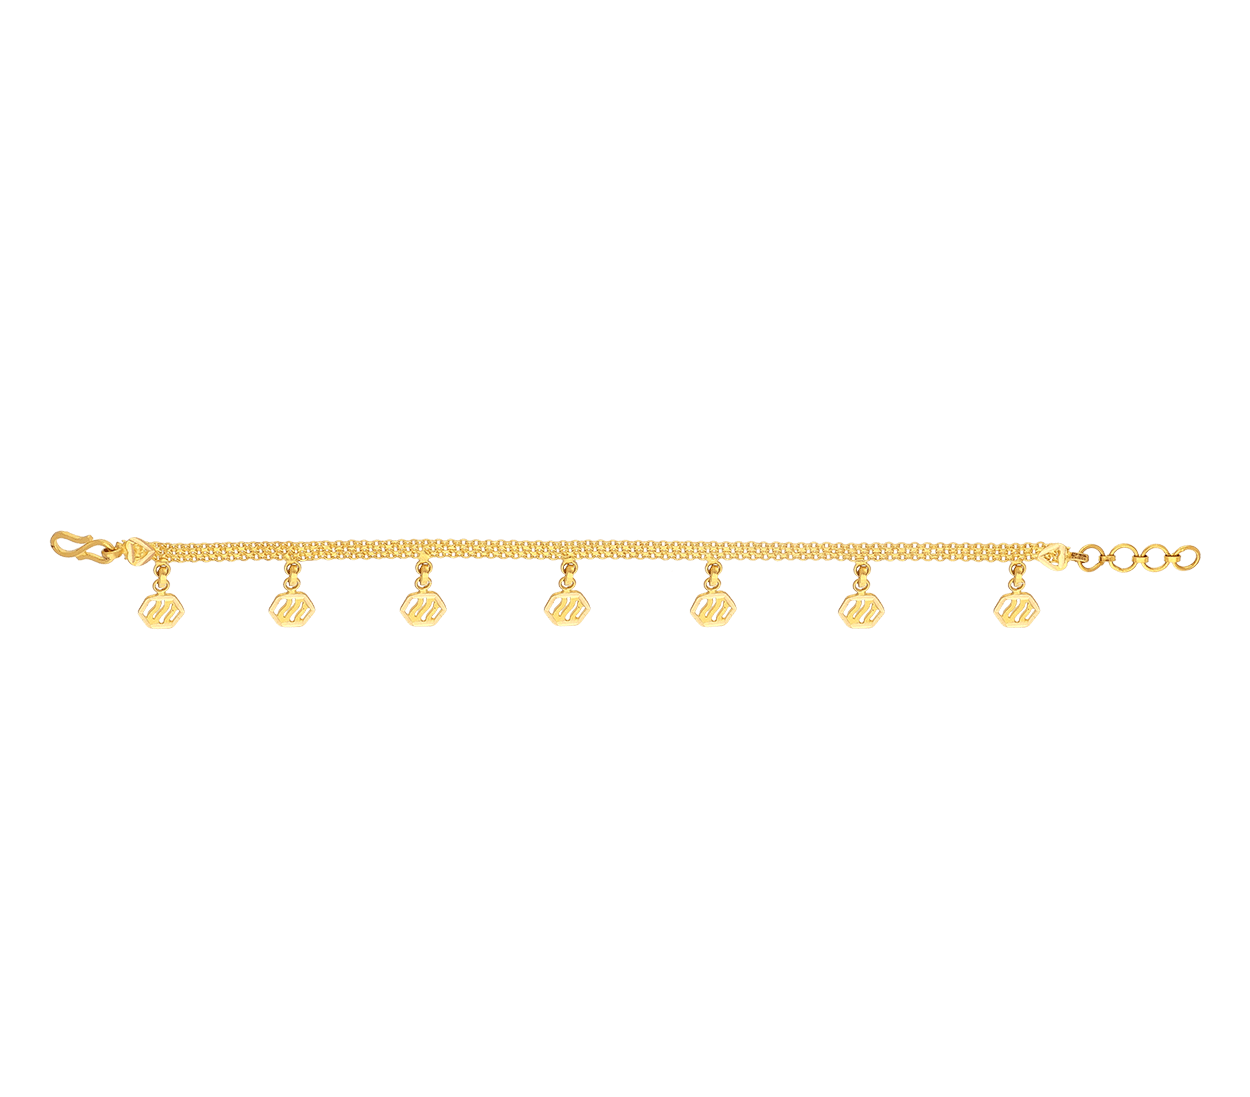 22K Gold Ladies Bracelet - brla27413 - US$ 1,164 - This beautiful 22K Gold  bracelet for Ladies is excellently handcrafted with filigree work in shine f